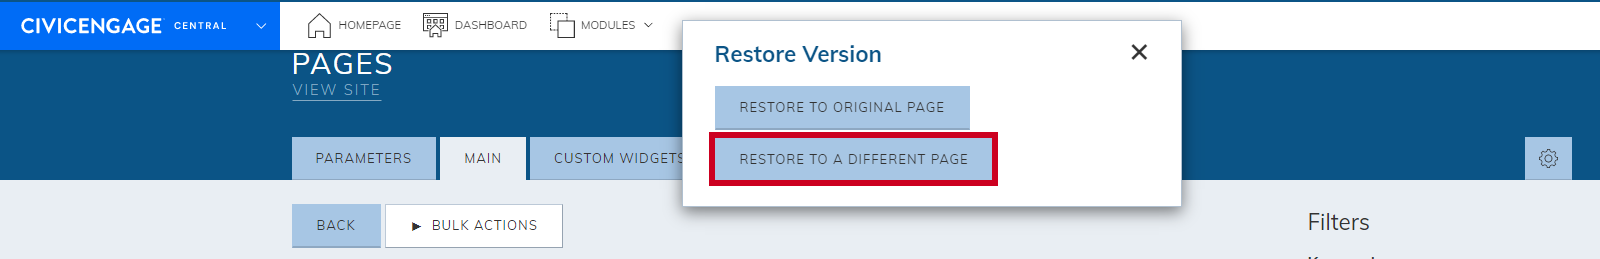 restore_to_diff_page.png